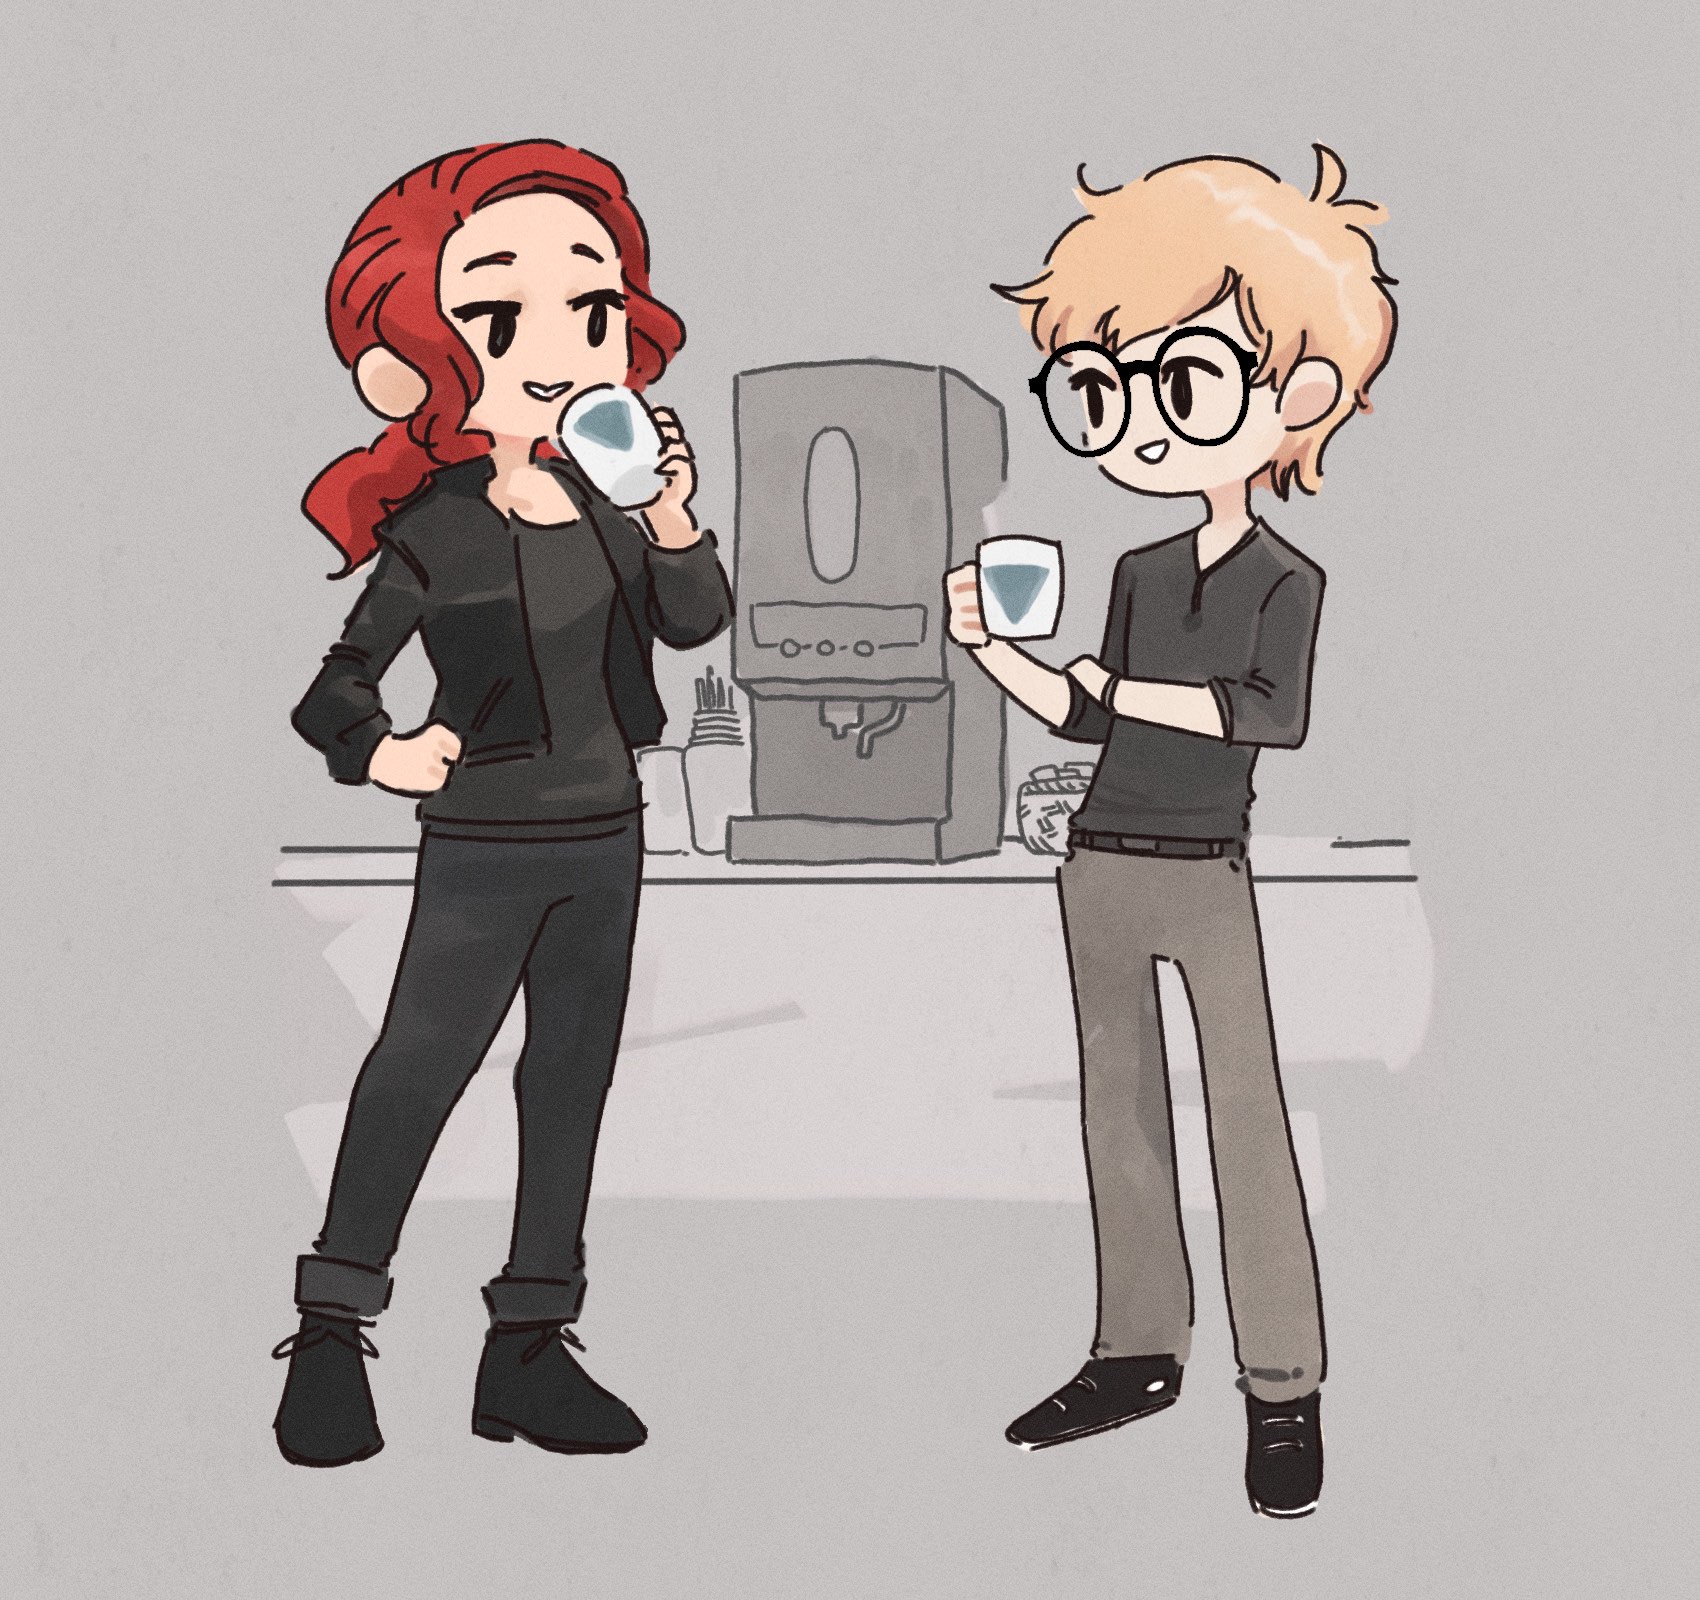 My persona Atlas, standing next to jesse from control. Theyre standing in front of a coffee machine, holding coffee mugs.